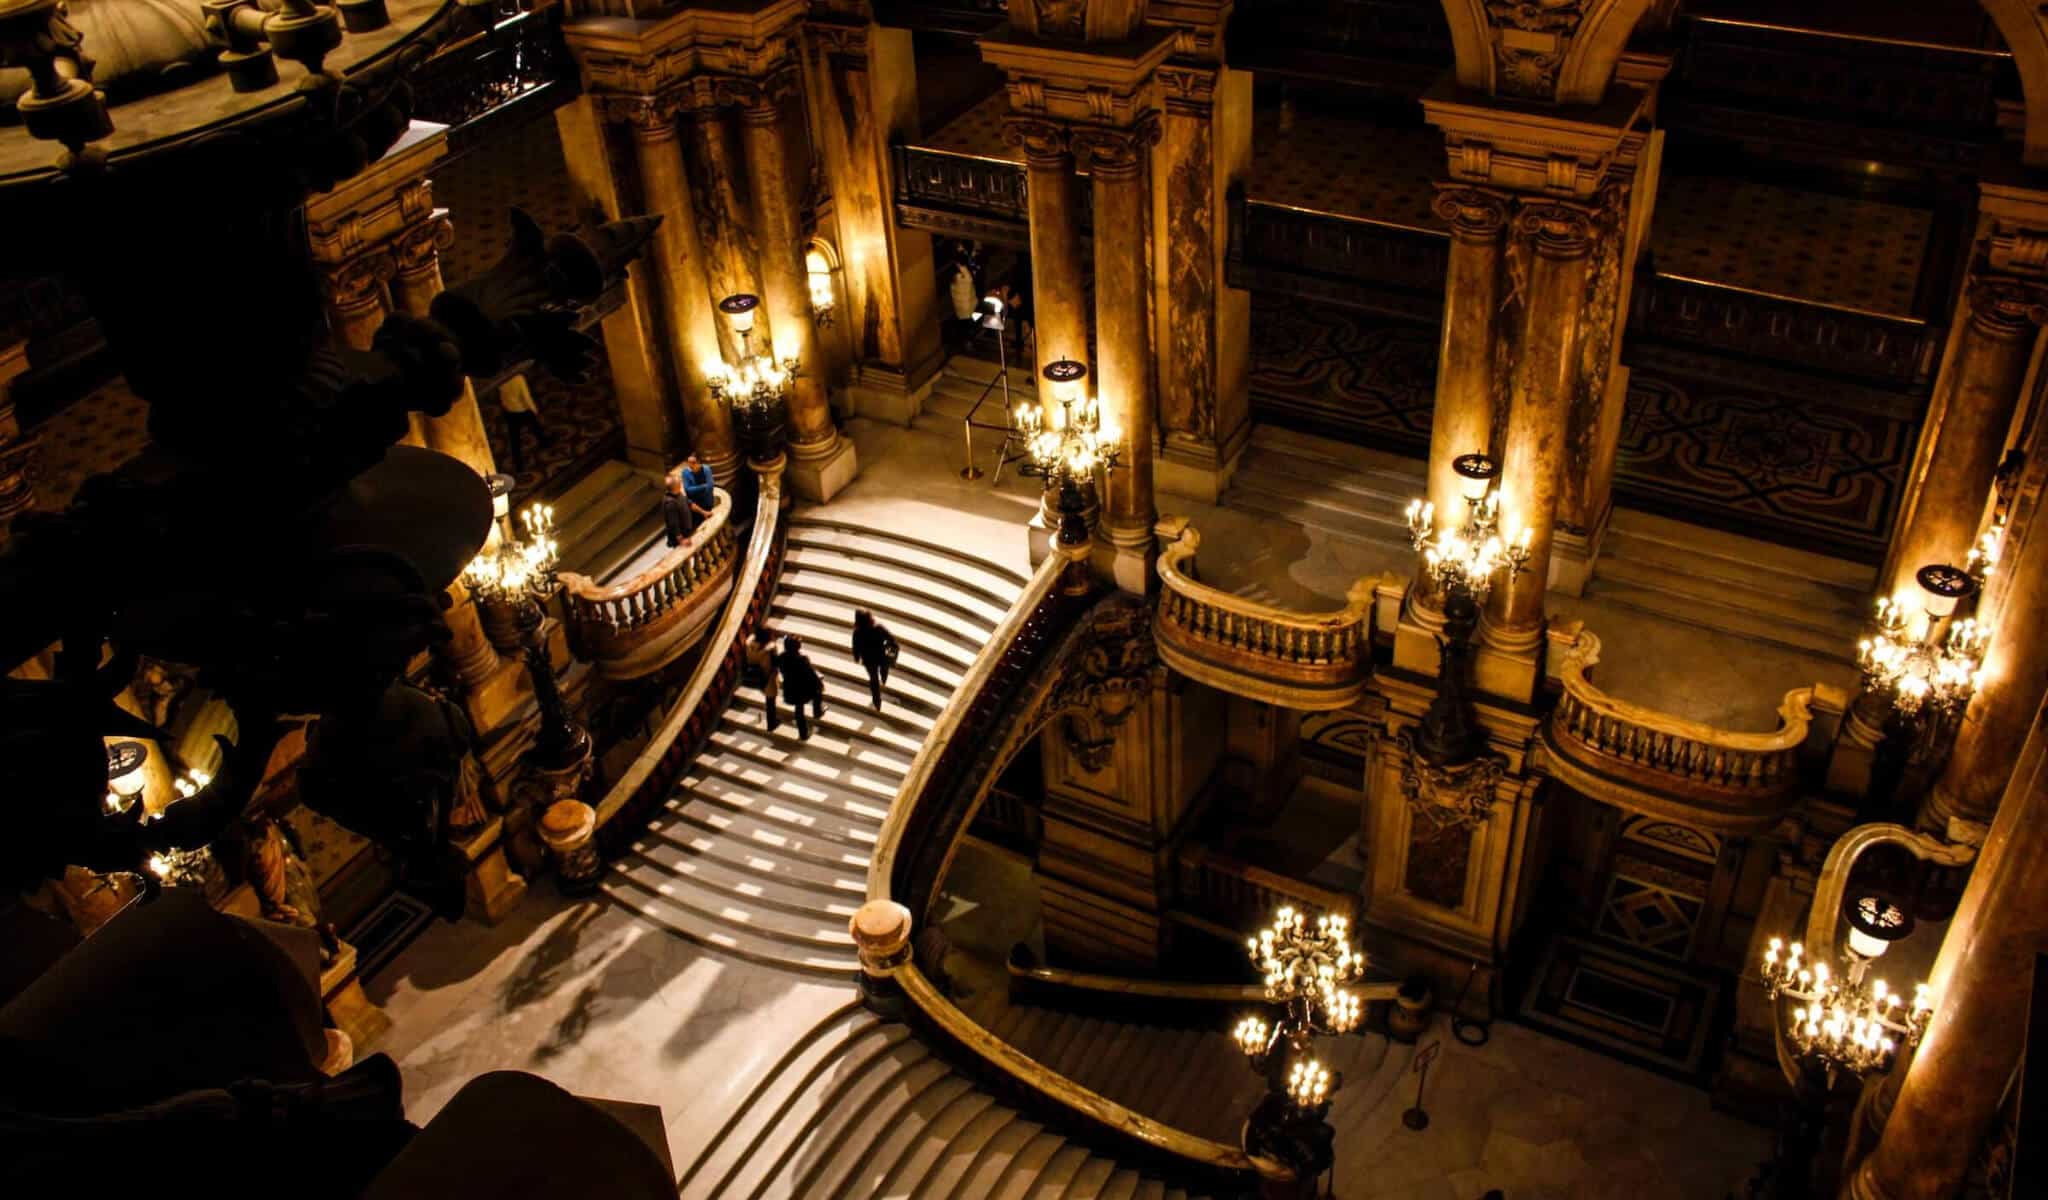 The inside of the Opera Garnier in Paris, full of marbled stairs and golden lights.